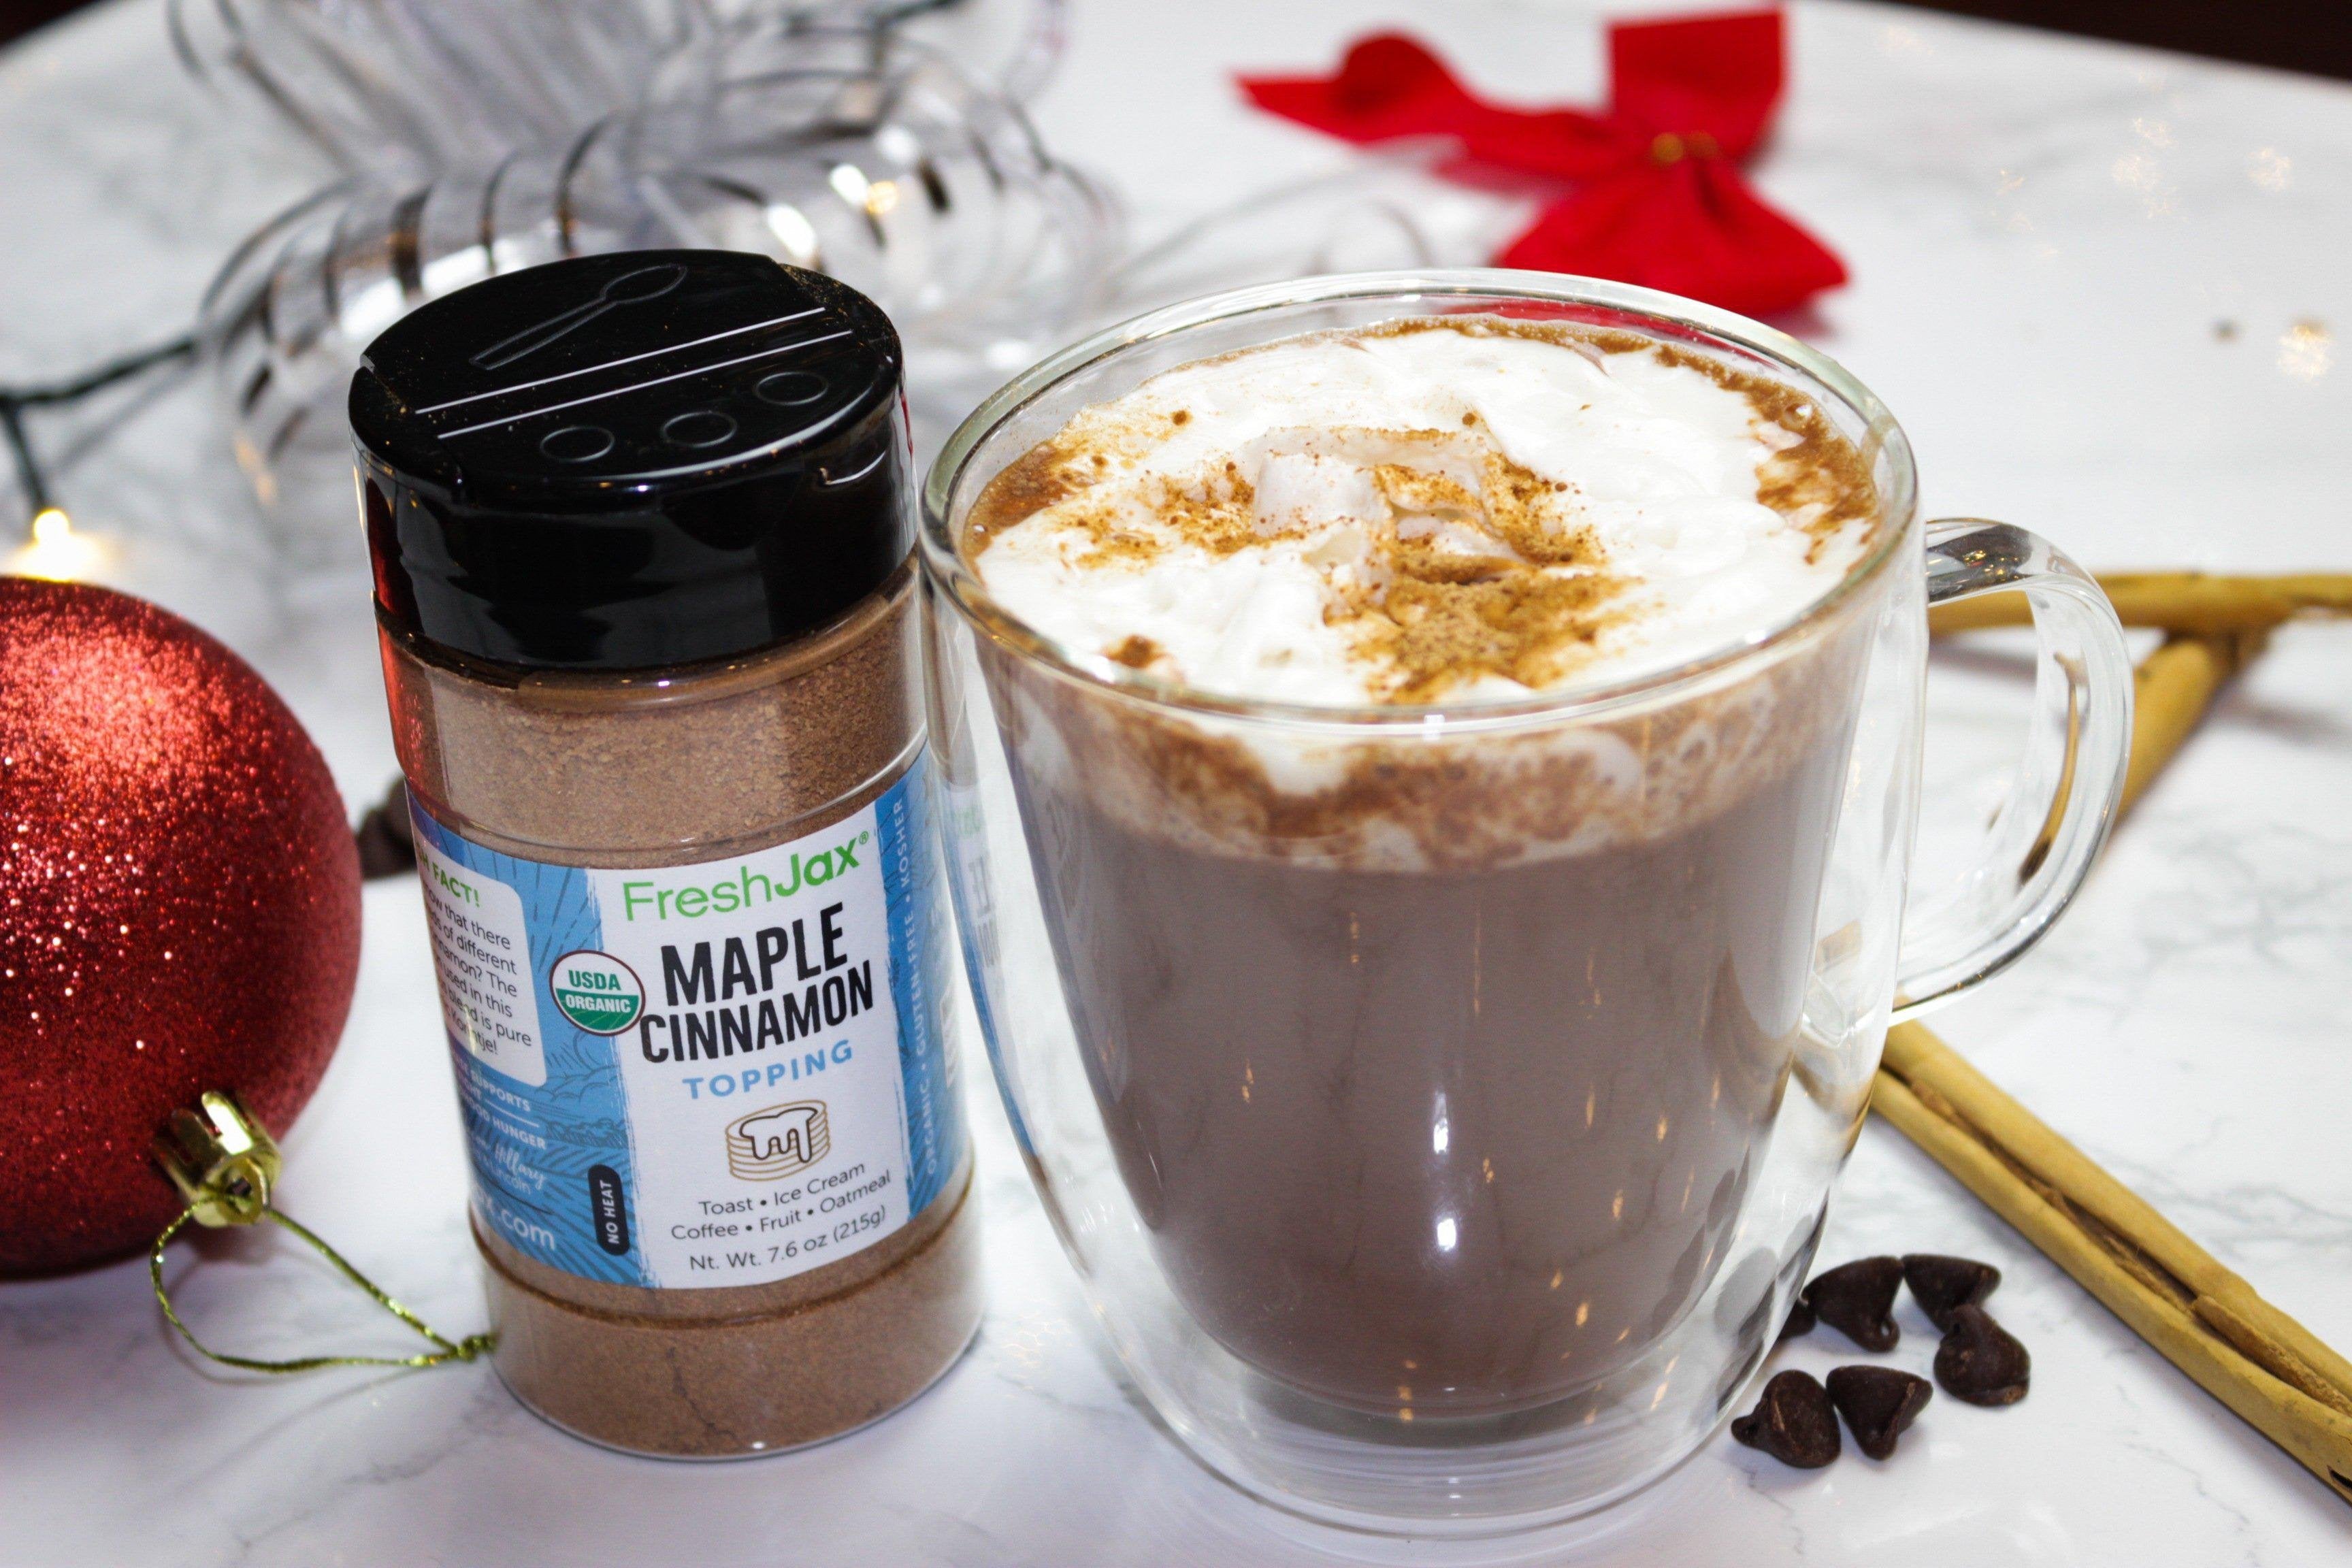 A large bottle of FreshJax Organic Maple Cinnamon Topping next to a mug of vegan hot cocoa topped with whipped cream and maple cinnamon. With a holiday themed background.